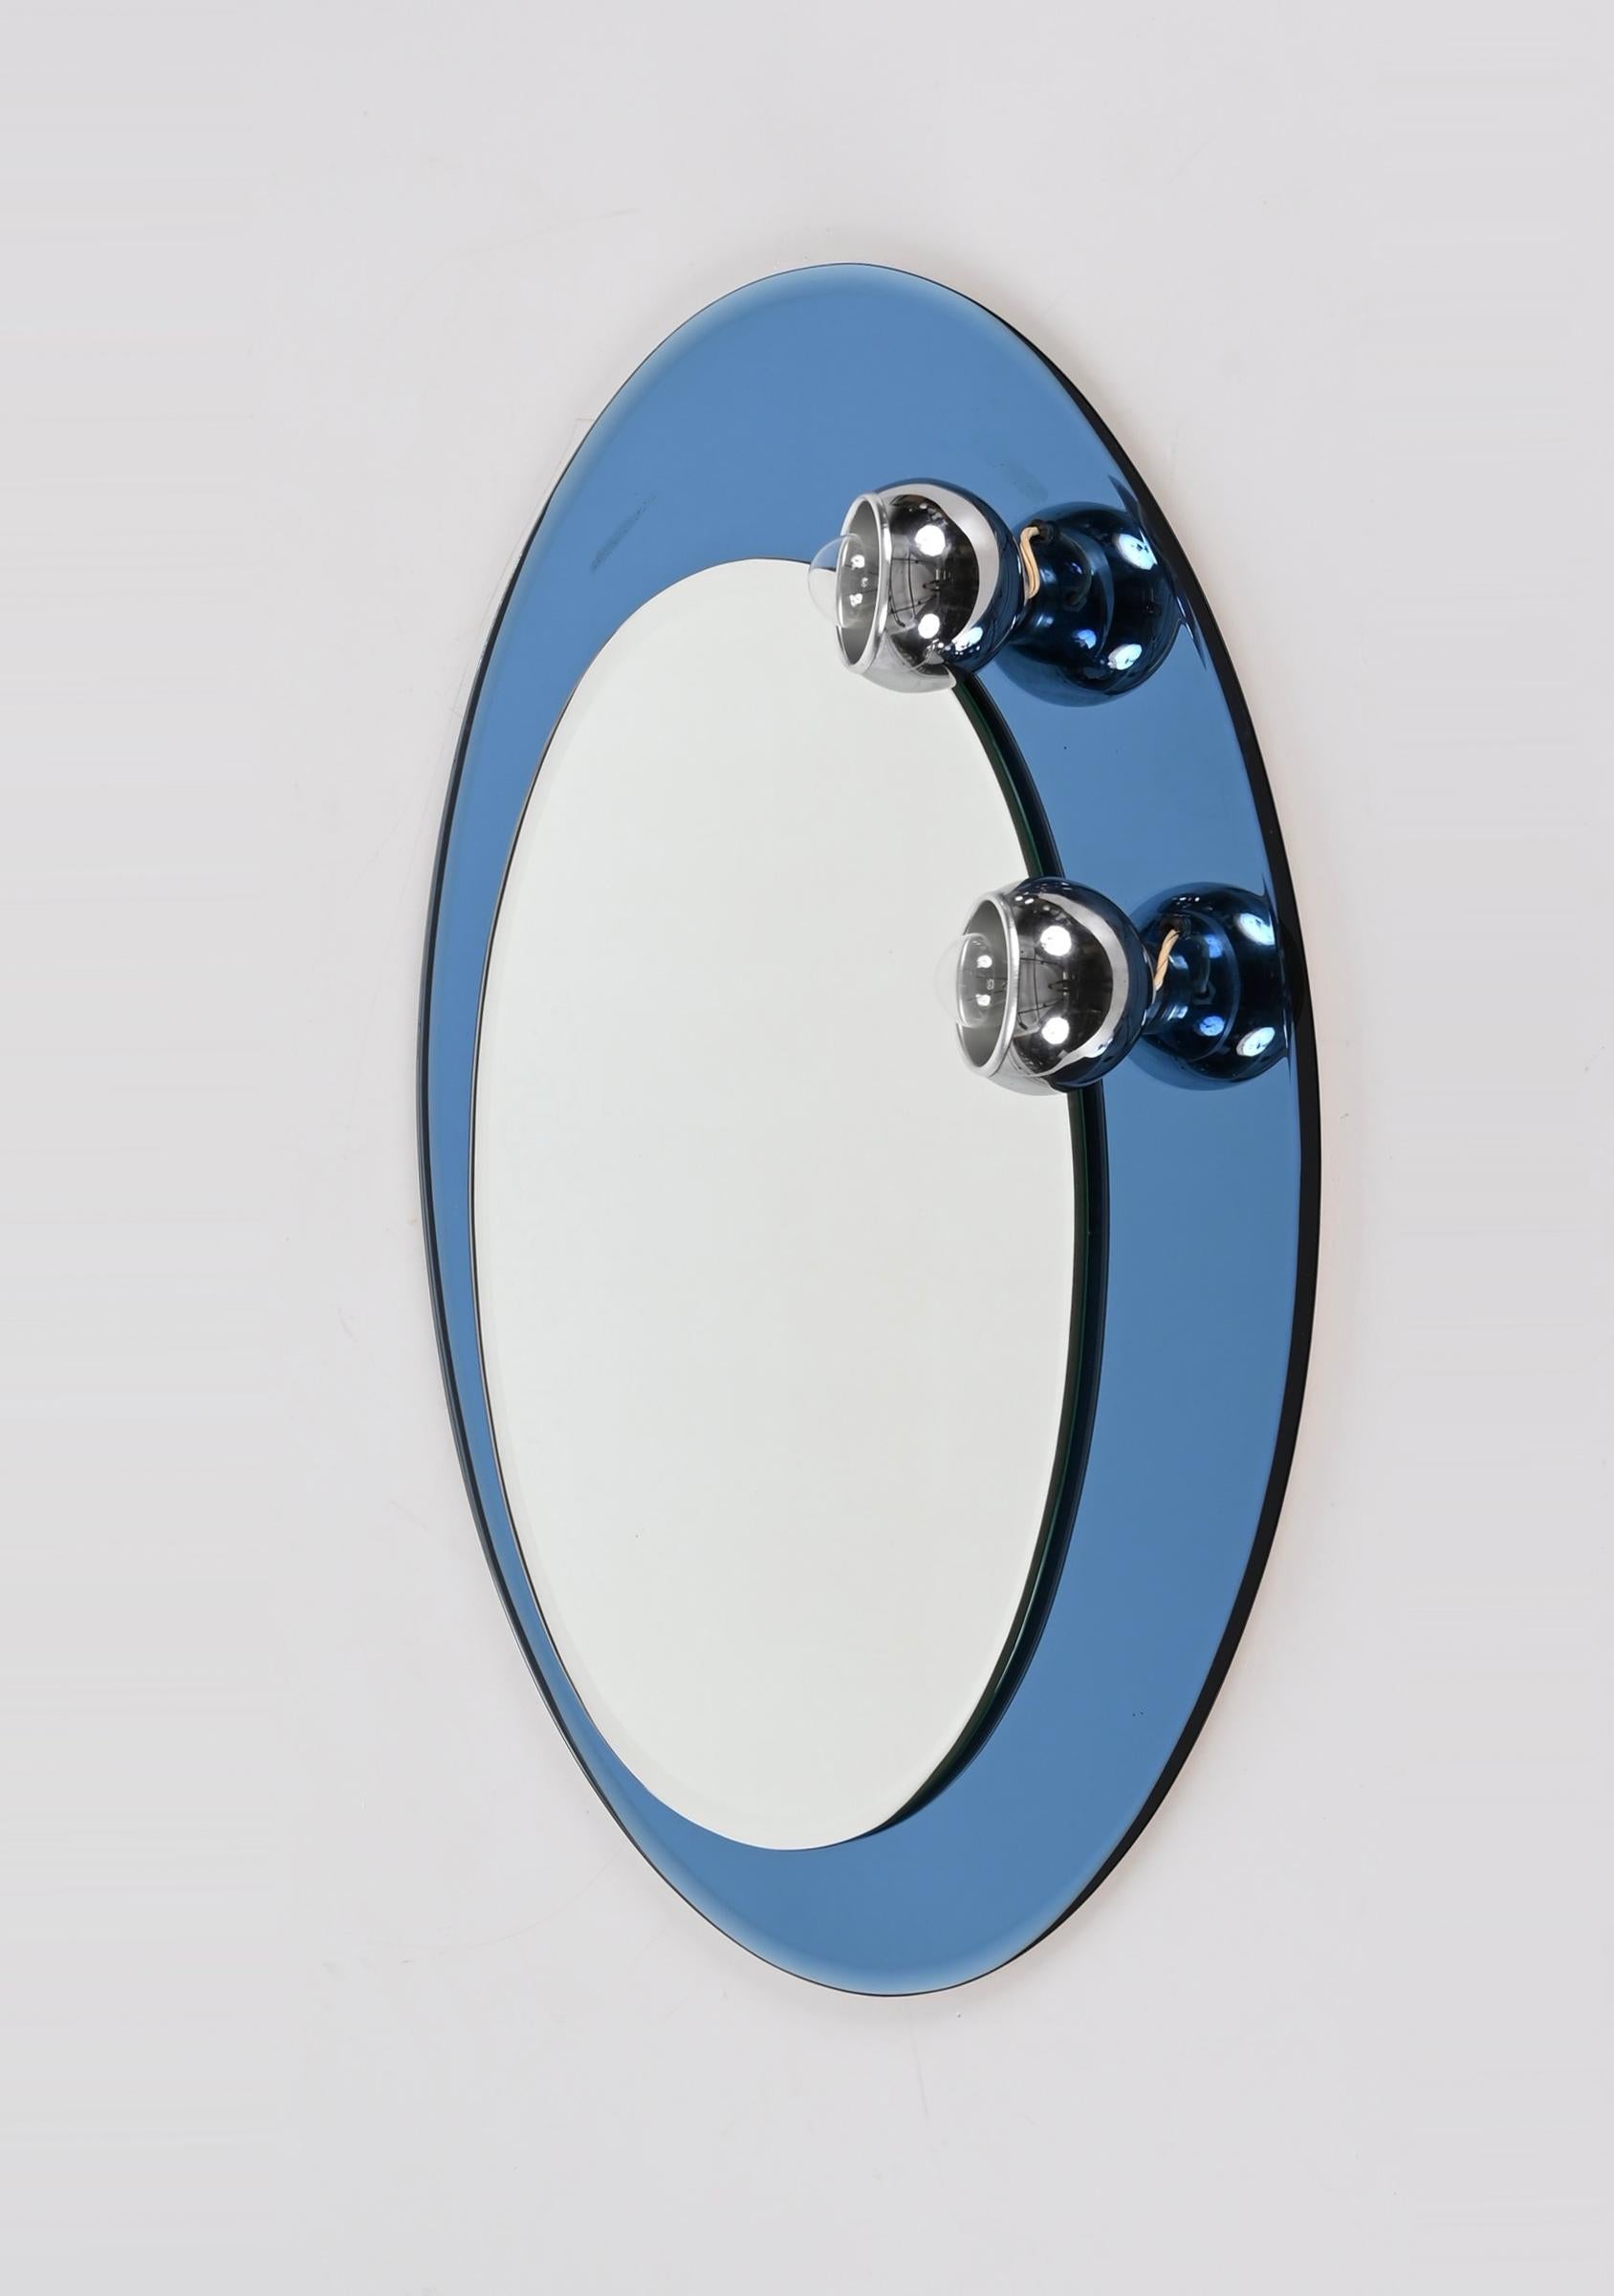 Midcentury Oval Wall Mirror with Blue Glass Frame and Magnetic Lights Italy 1960 For Sale 6